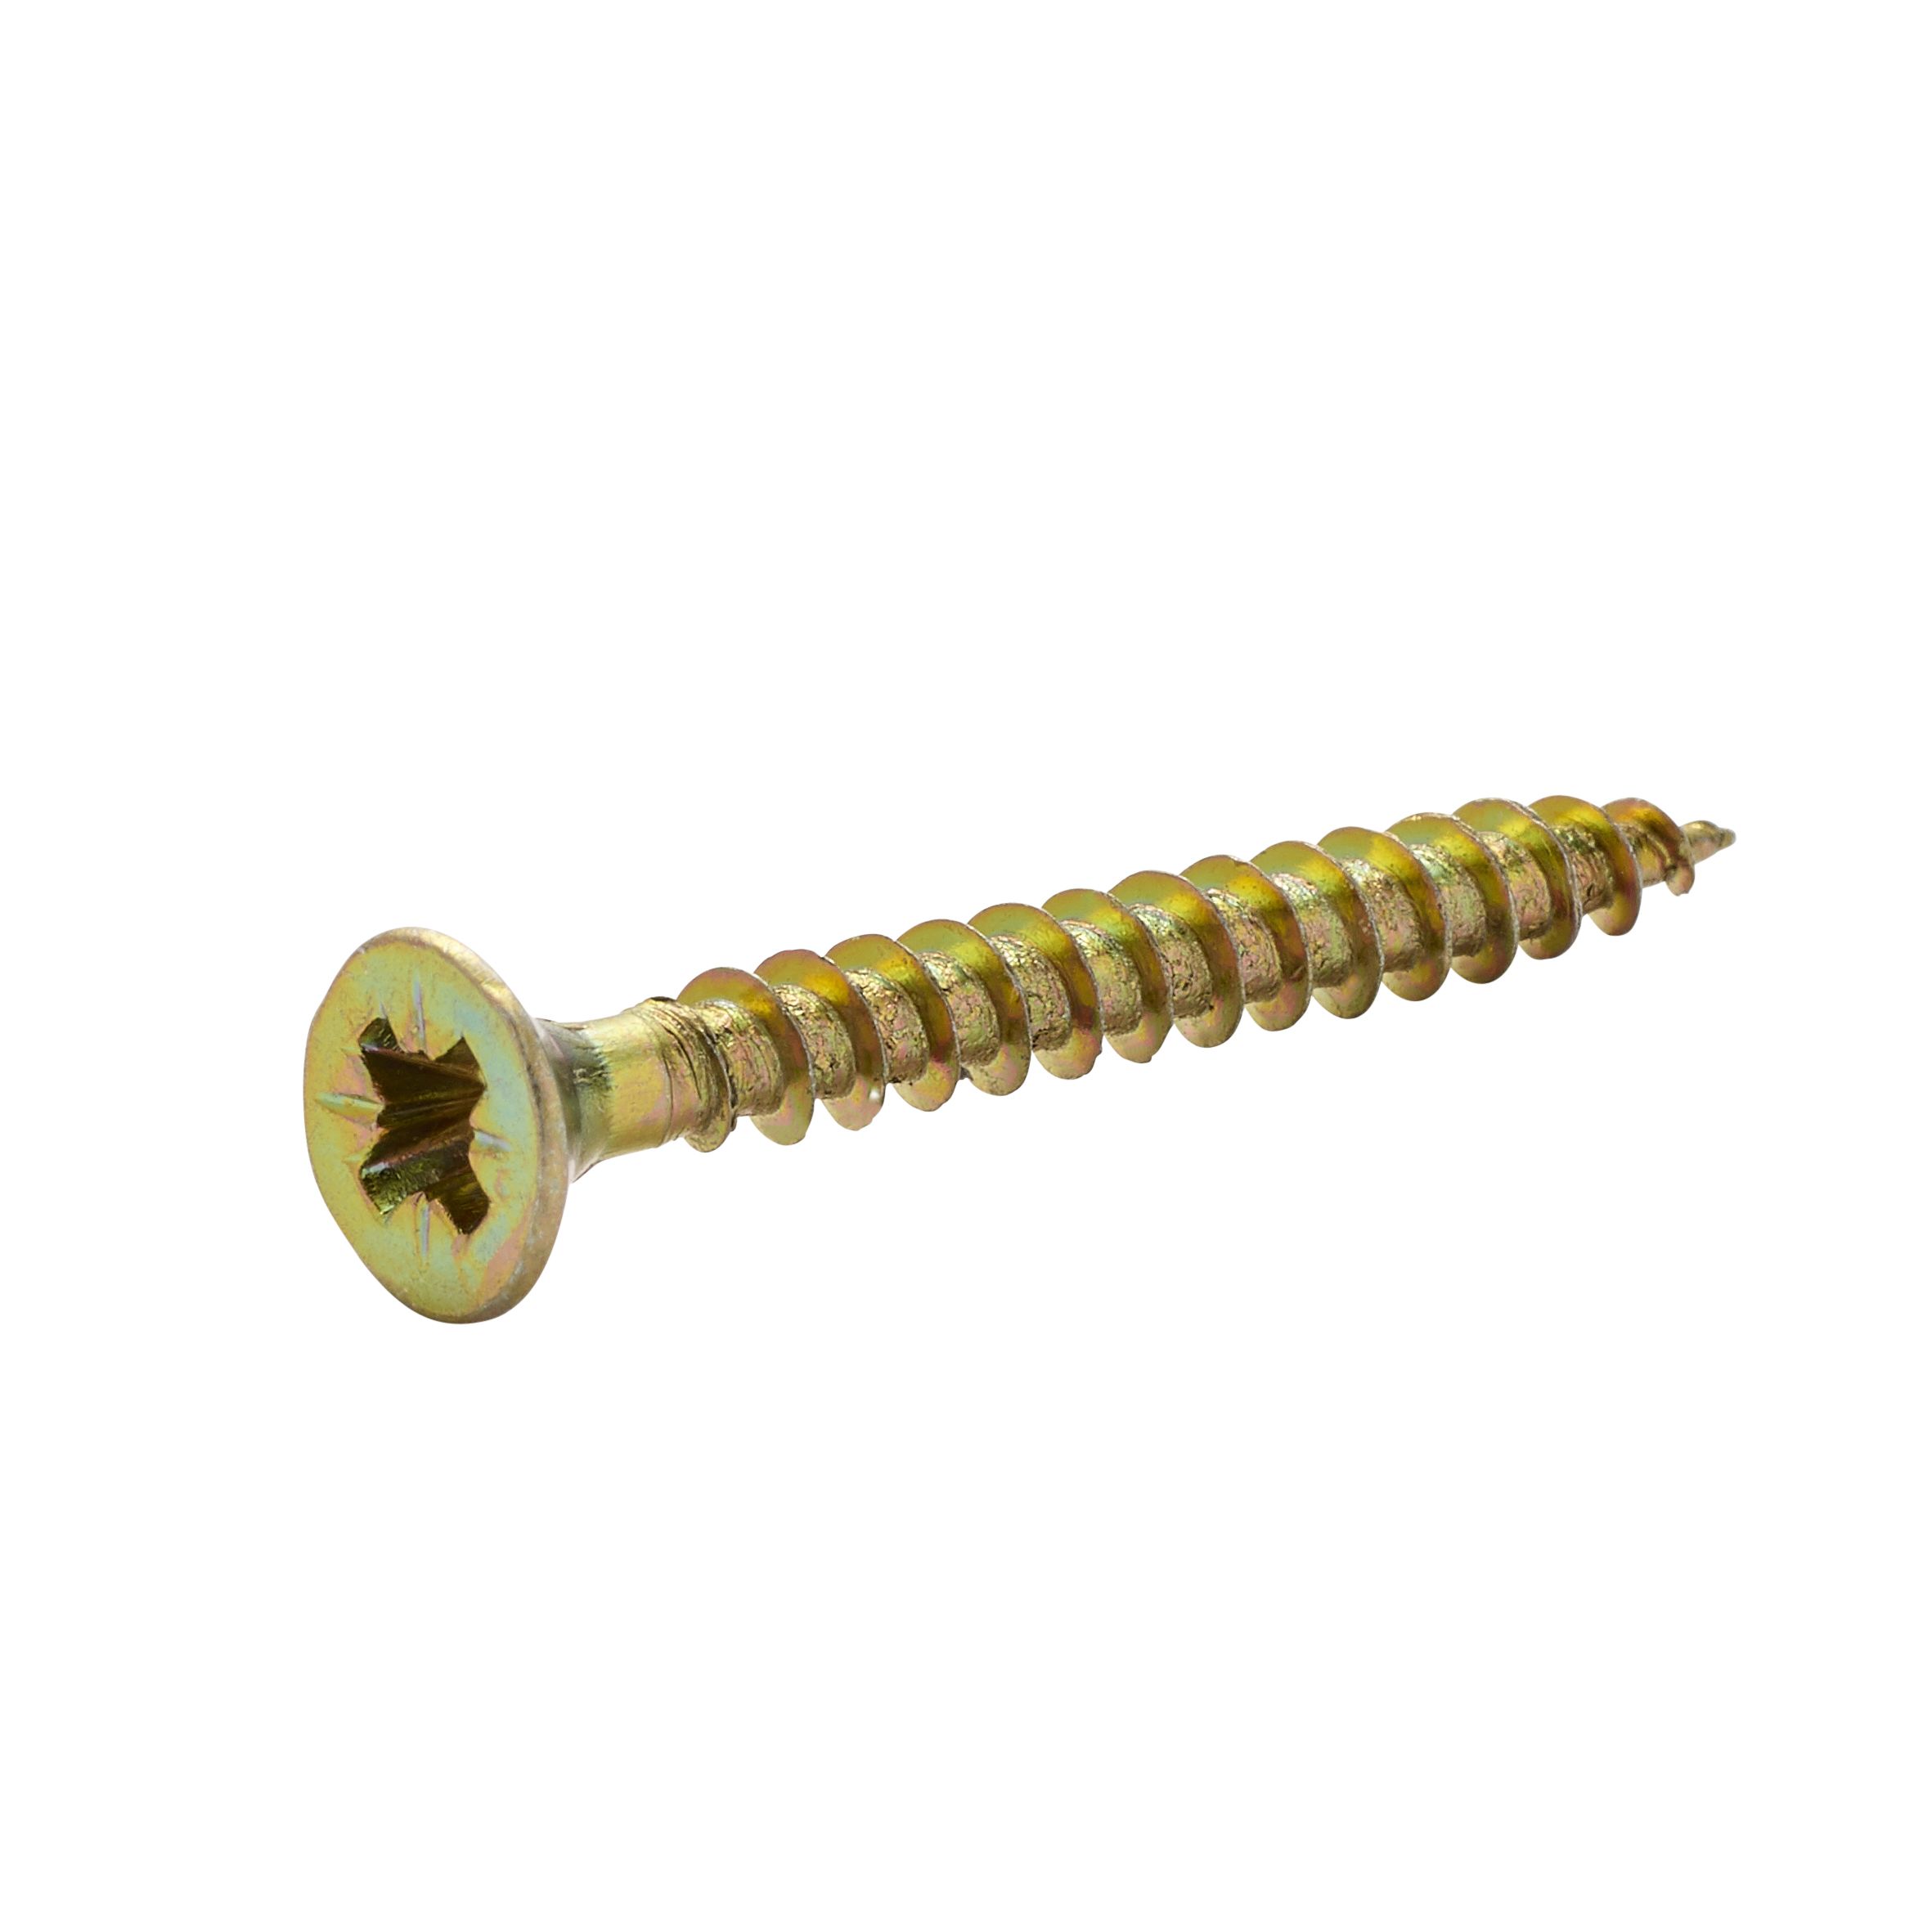 Diall Yellow-passivated Carbon steel Screw (Dia)3.5mm (L)30mm, Pack of 500